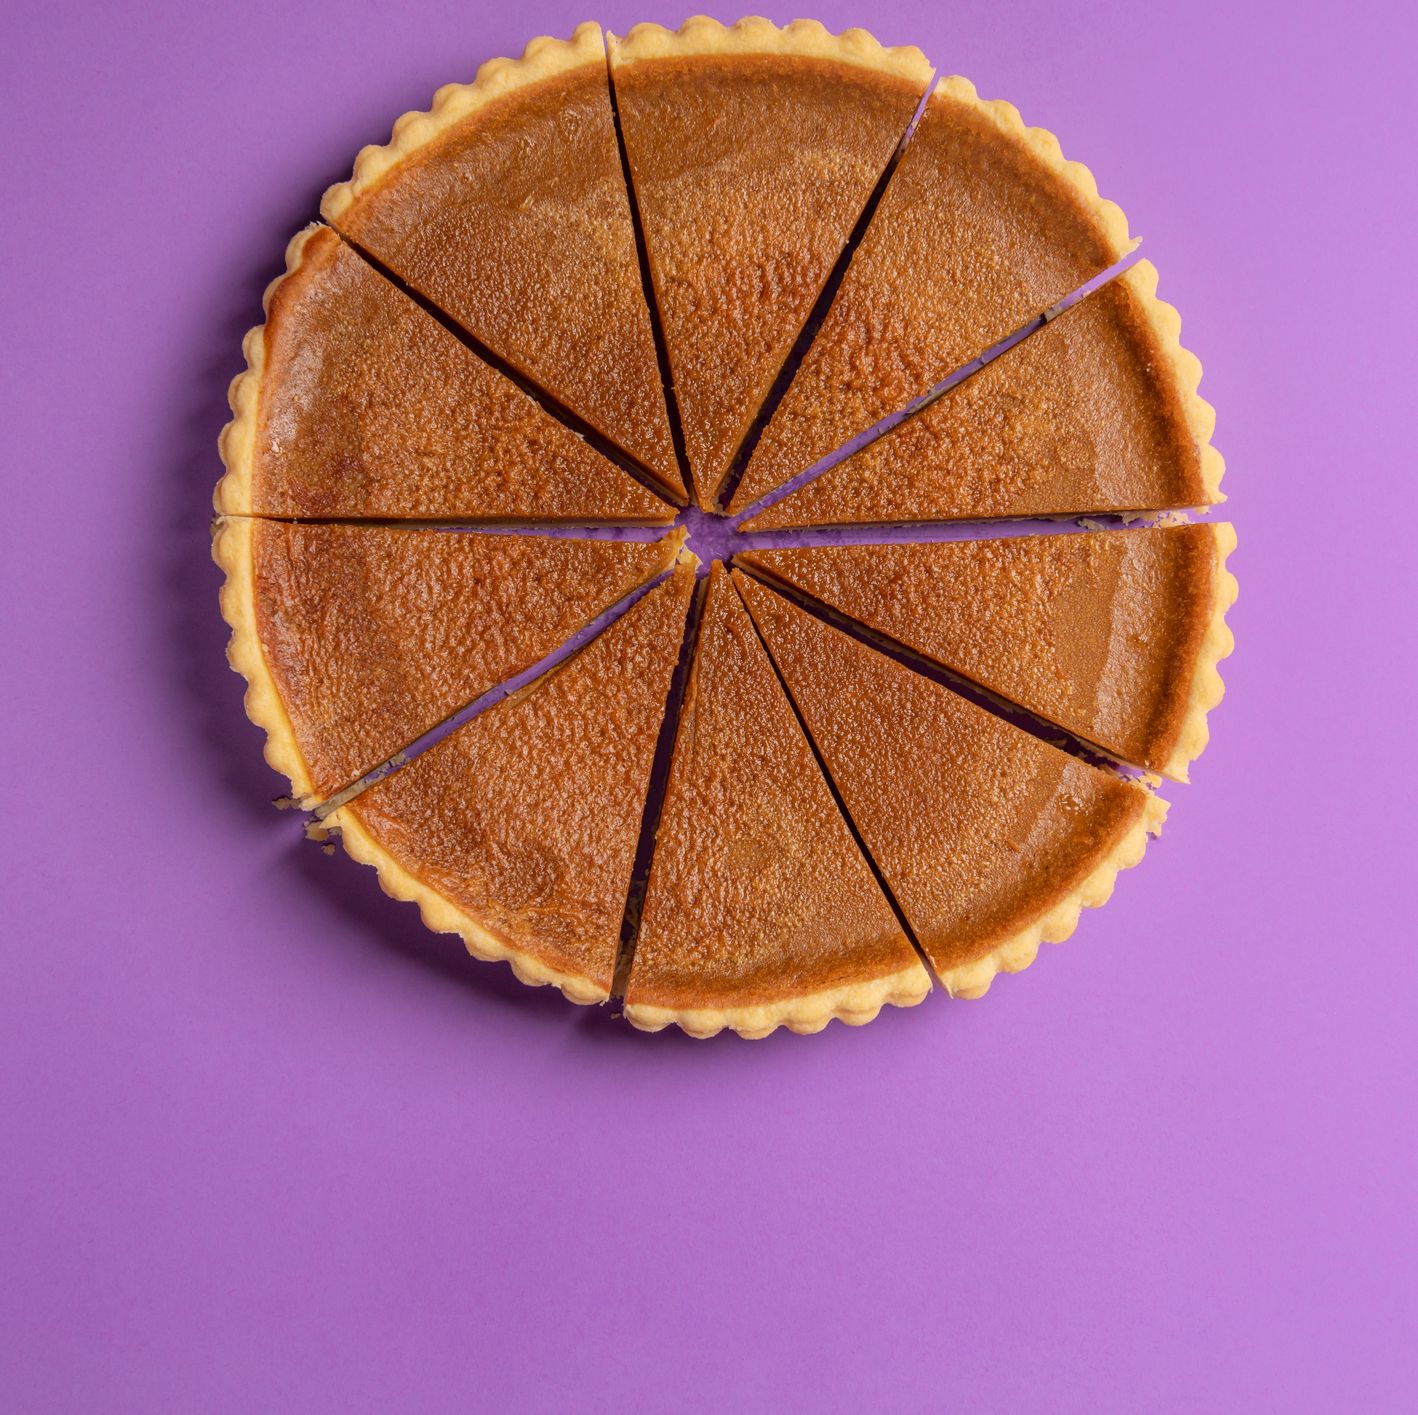 How to Slice a Pie in Four Dimensions, According to Math